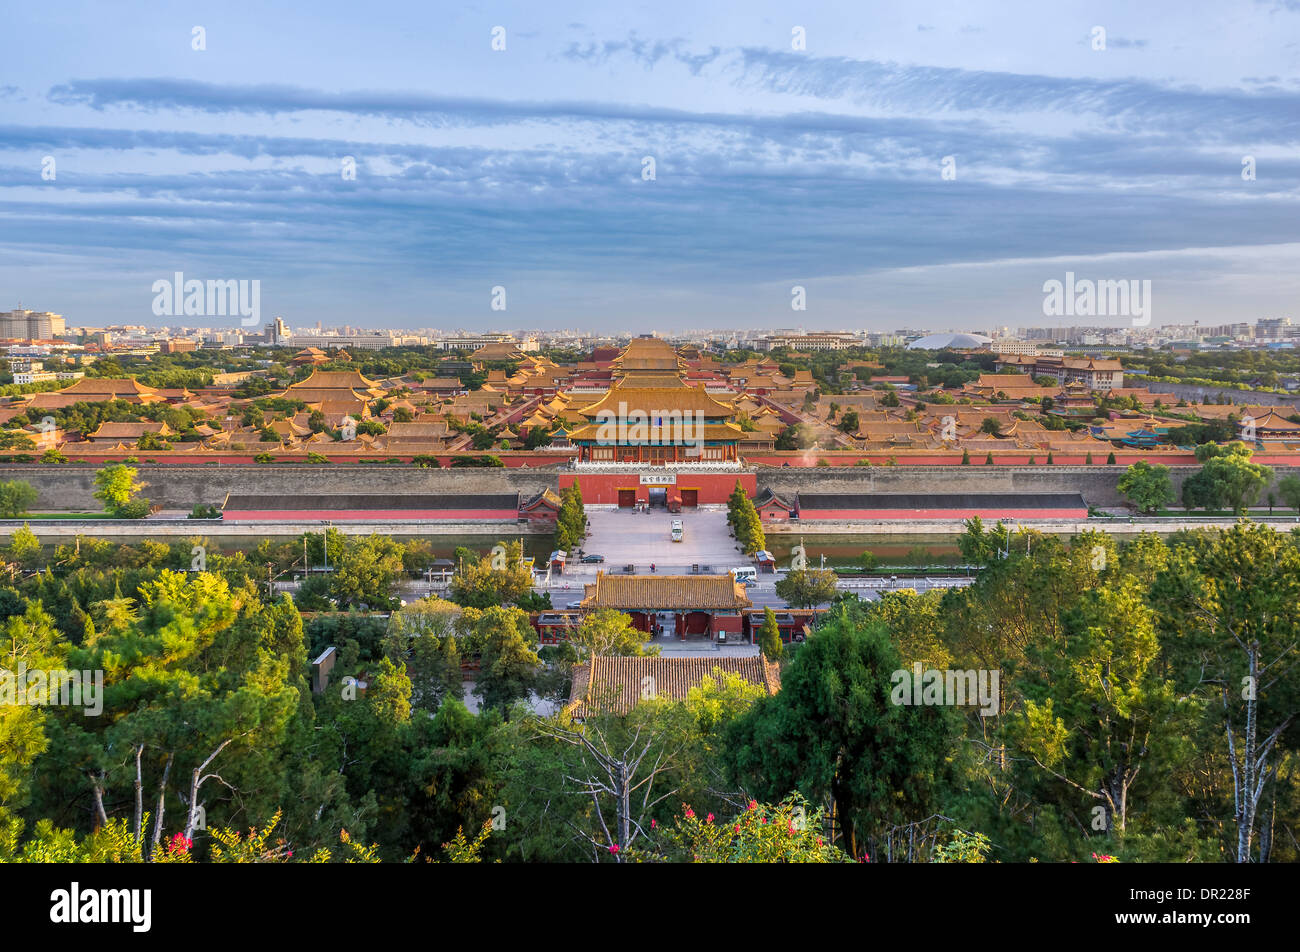 Overview of Forbidden City, Beijing, China Stock Photo